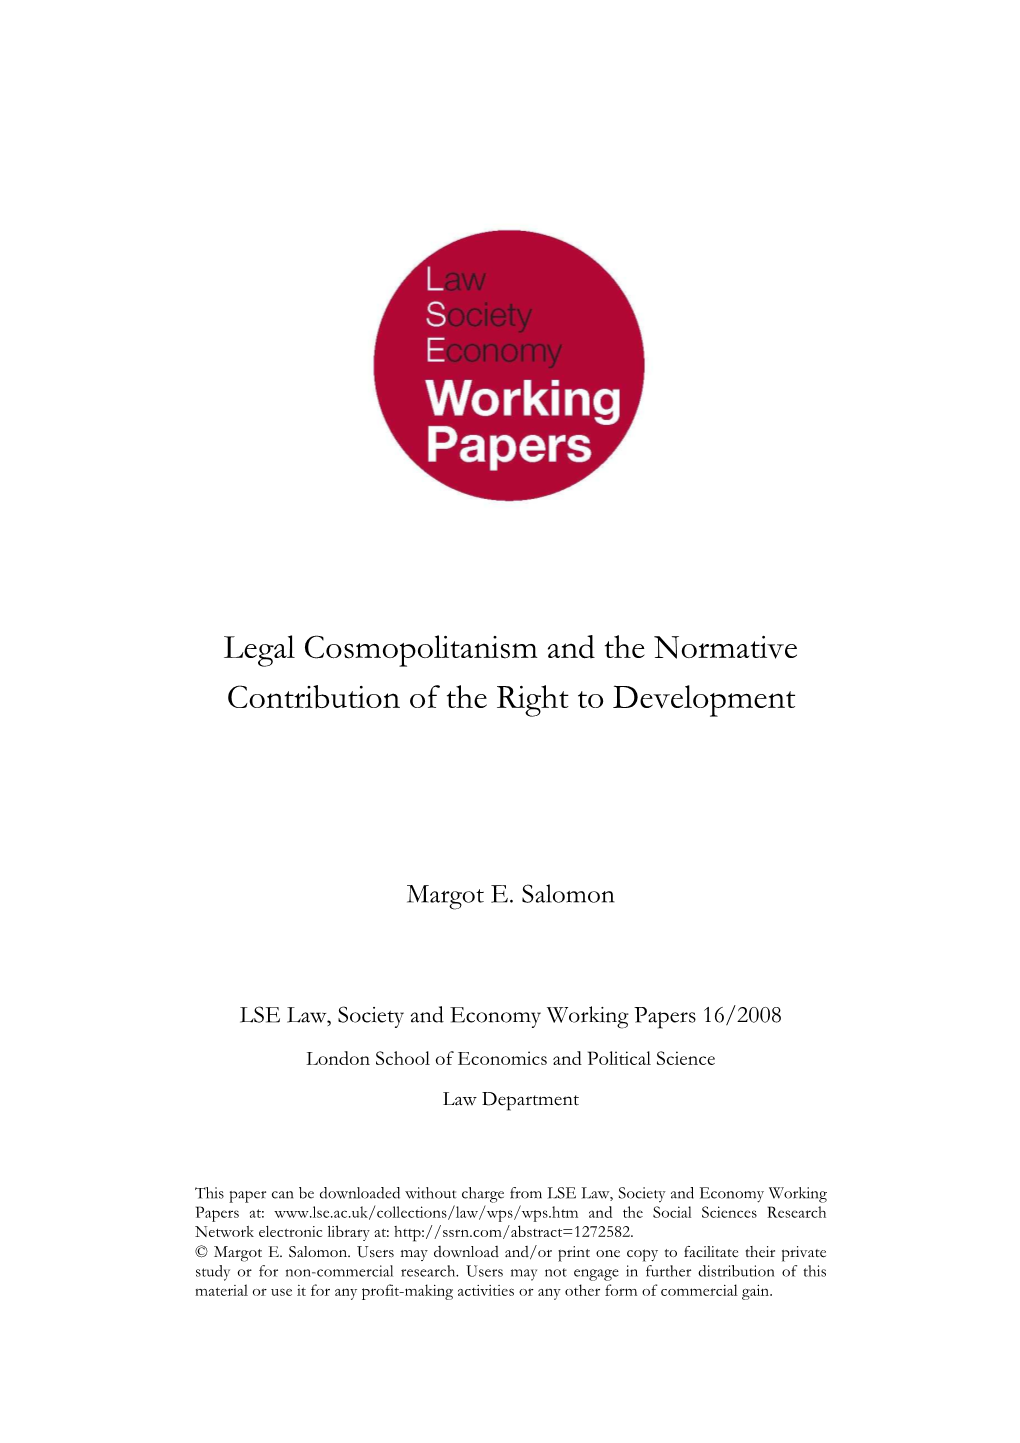 Legal Cosmopolitanism and the Normative Contribution of the Right to Development